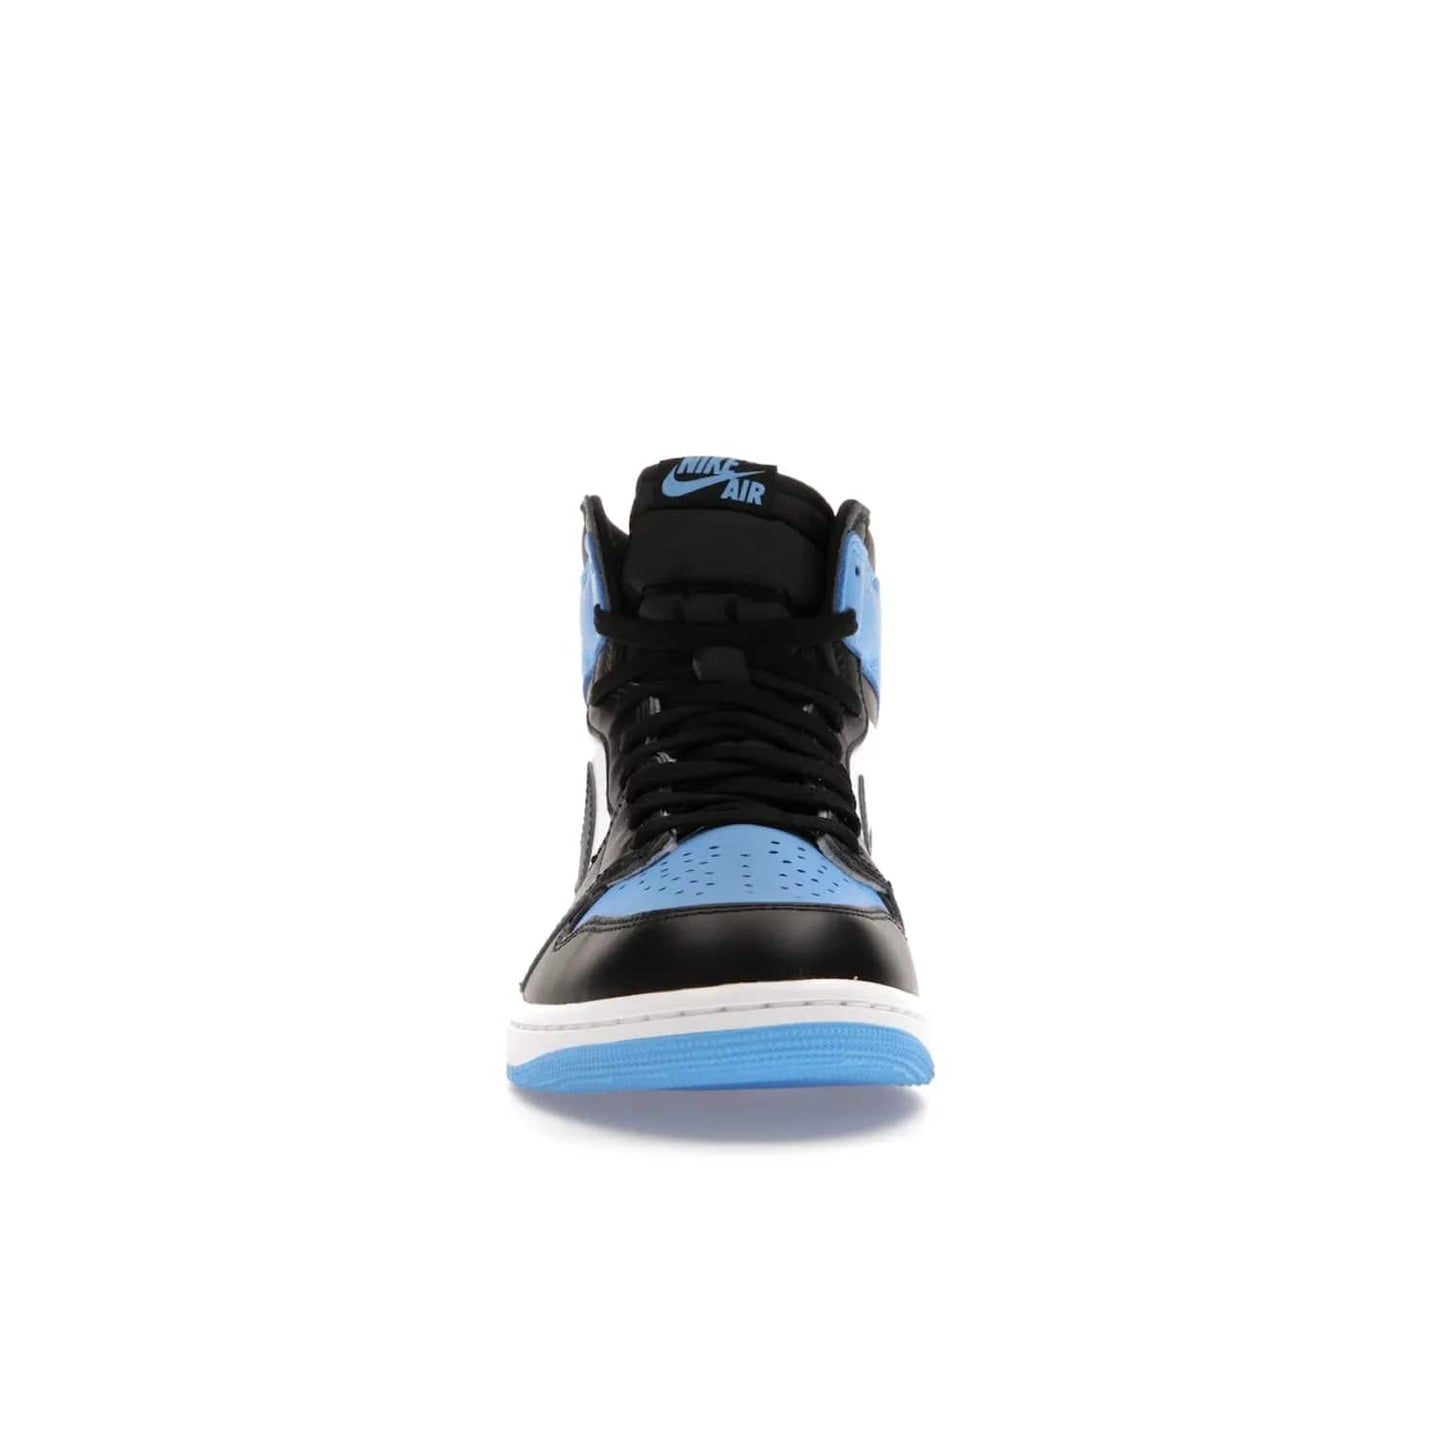 Jordan 1 Retro High OG UNC Toe - Image 10 - Only at www.BallersClubKickz.com - Jordan 1 High OG UNC Toe is a fashionable, high-quality sneaker featuring University Blue, Black White and White. Releasing July 22, 2023, it's the perfect pick up for sneakerheads.